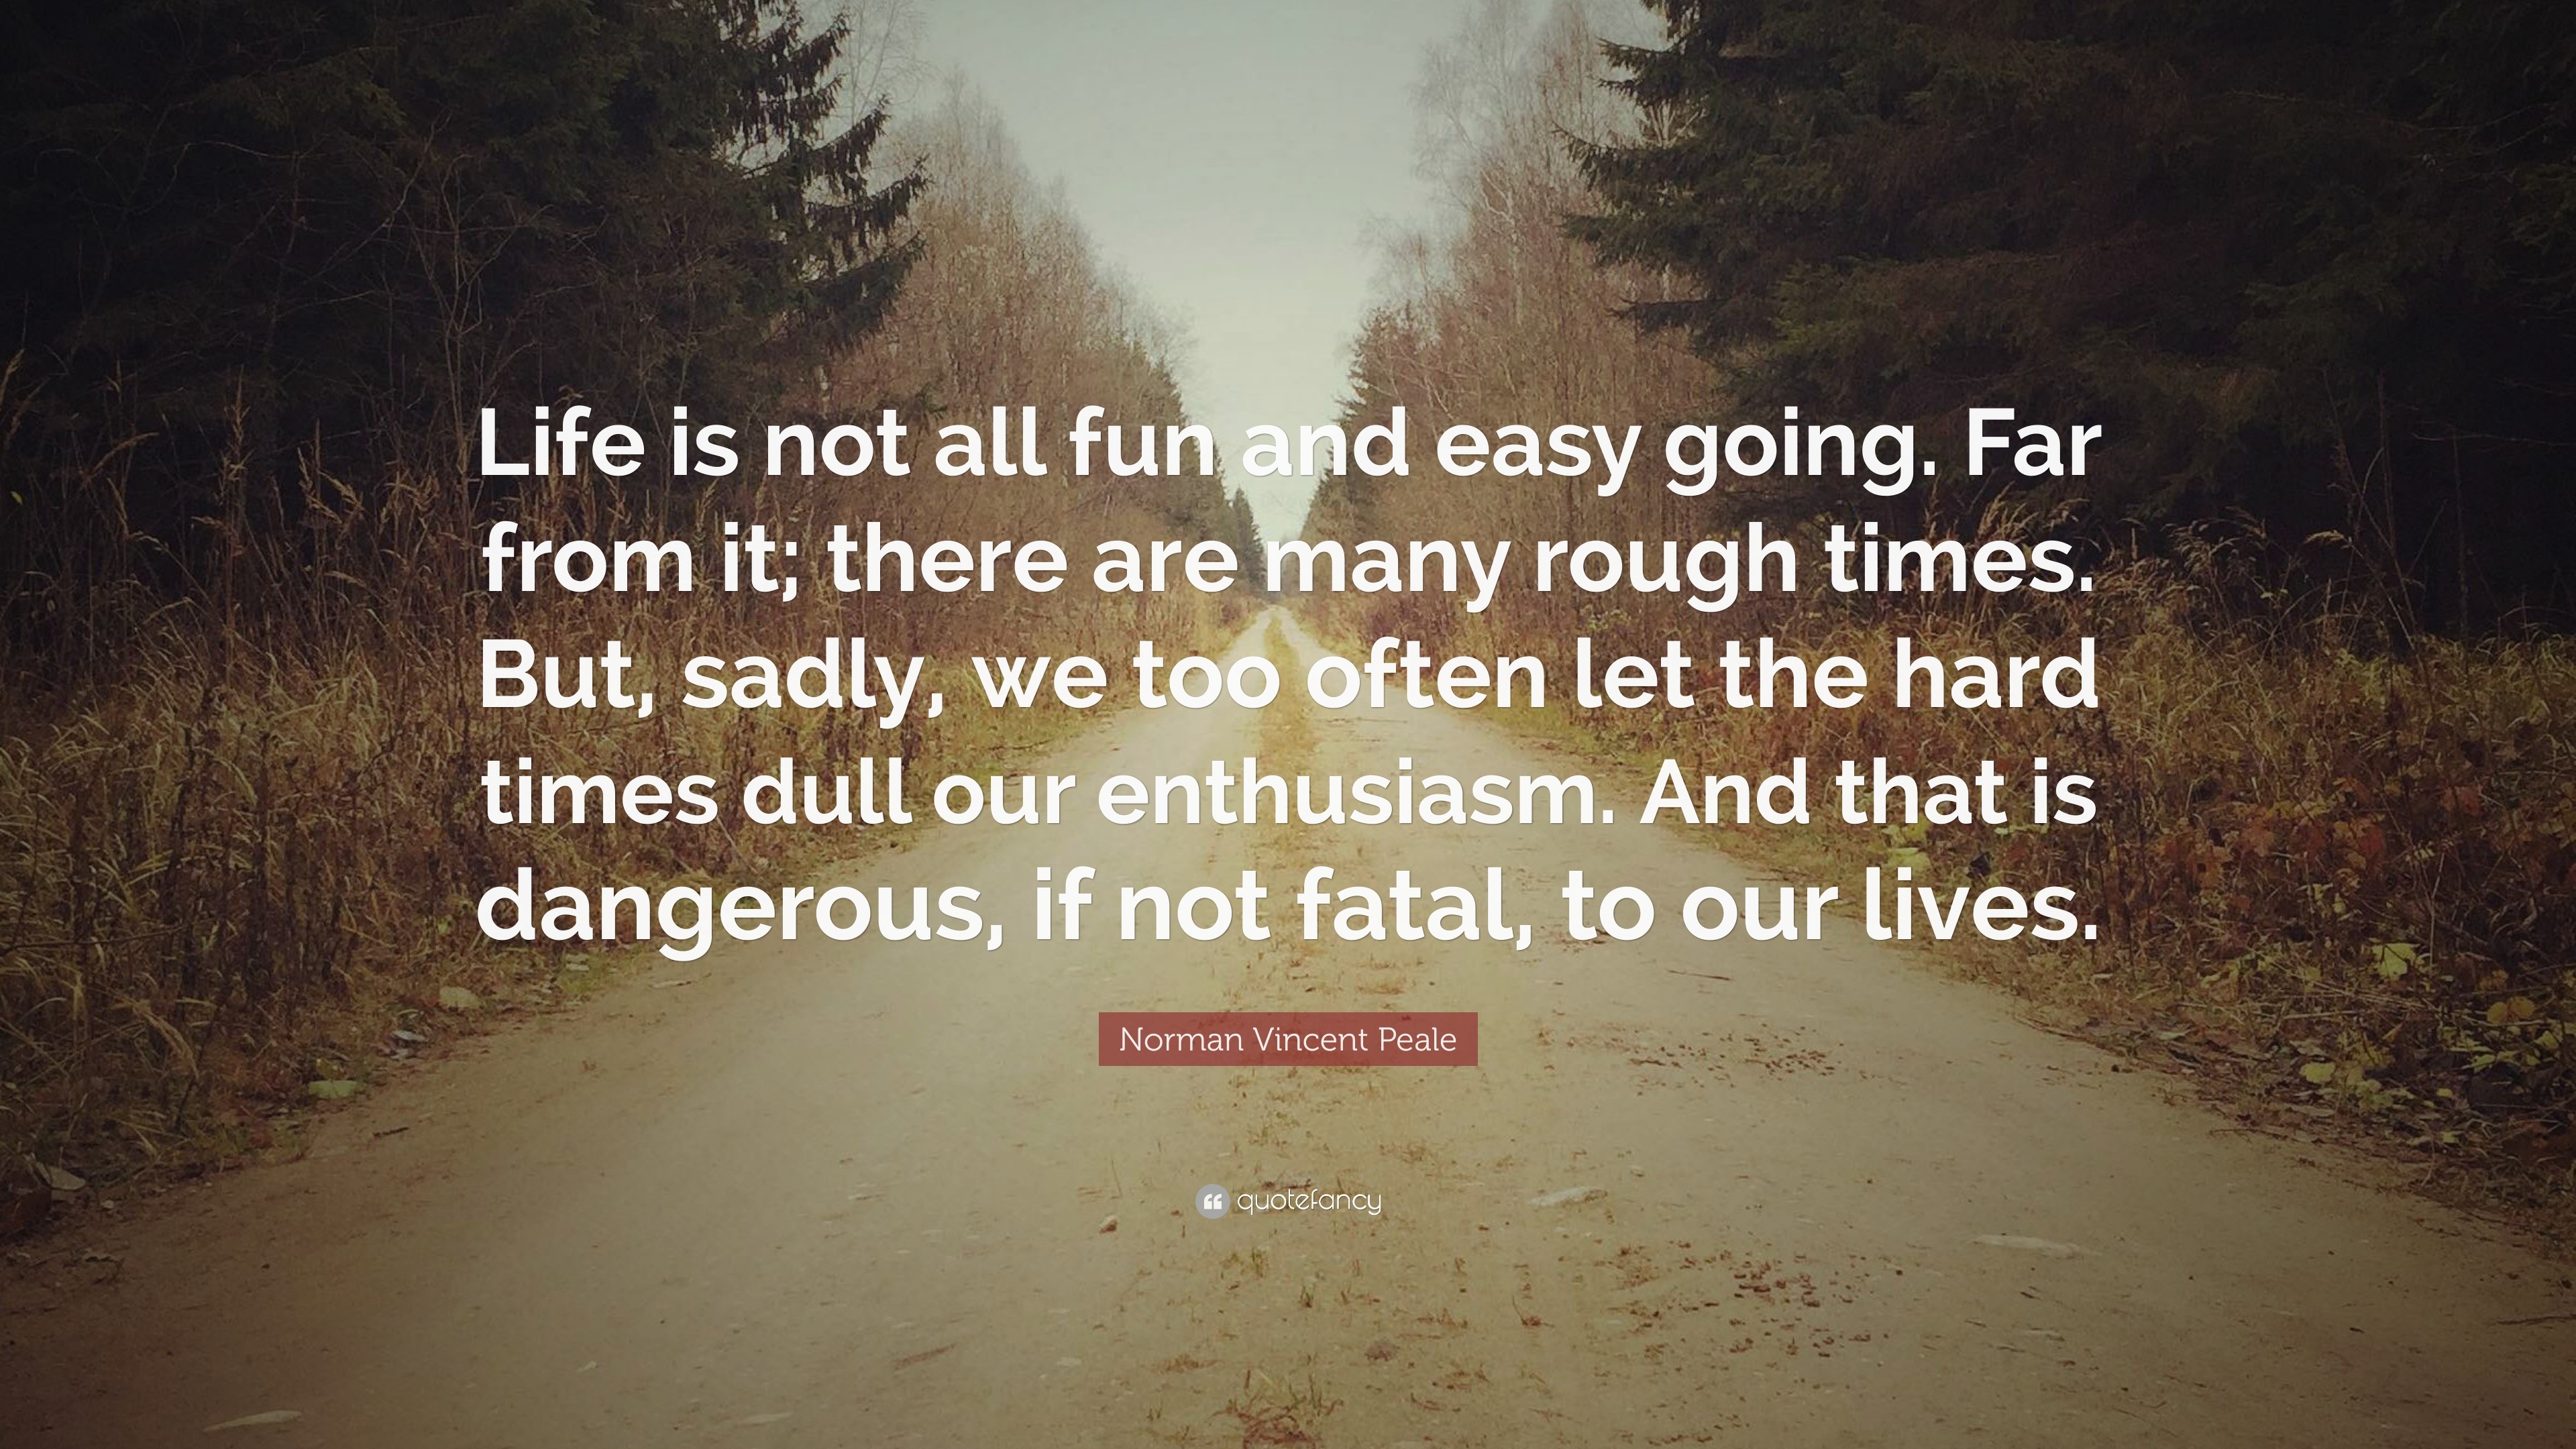 Norman Vincent Peale Quote “Life is not all fun and easy going Far